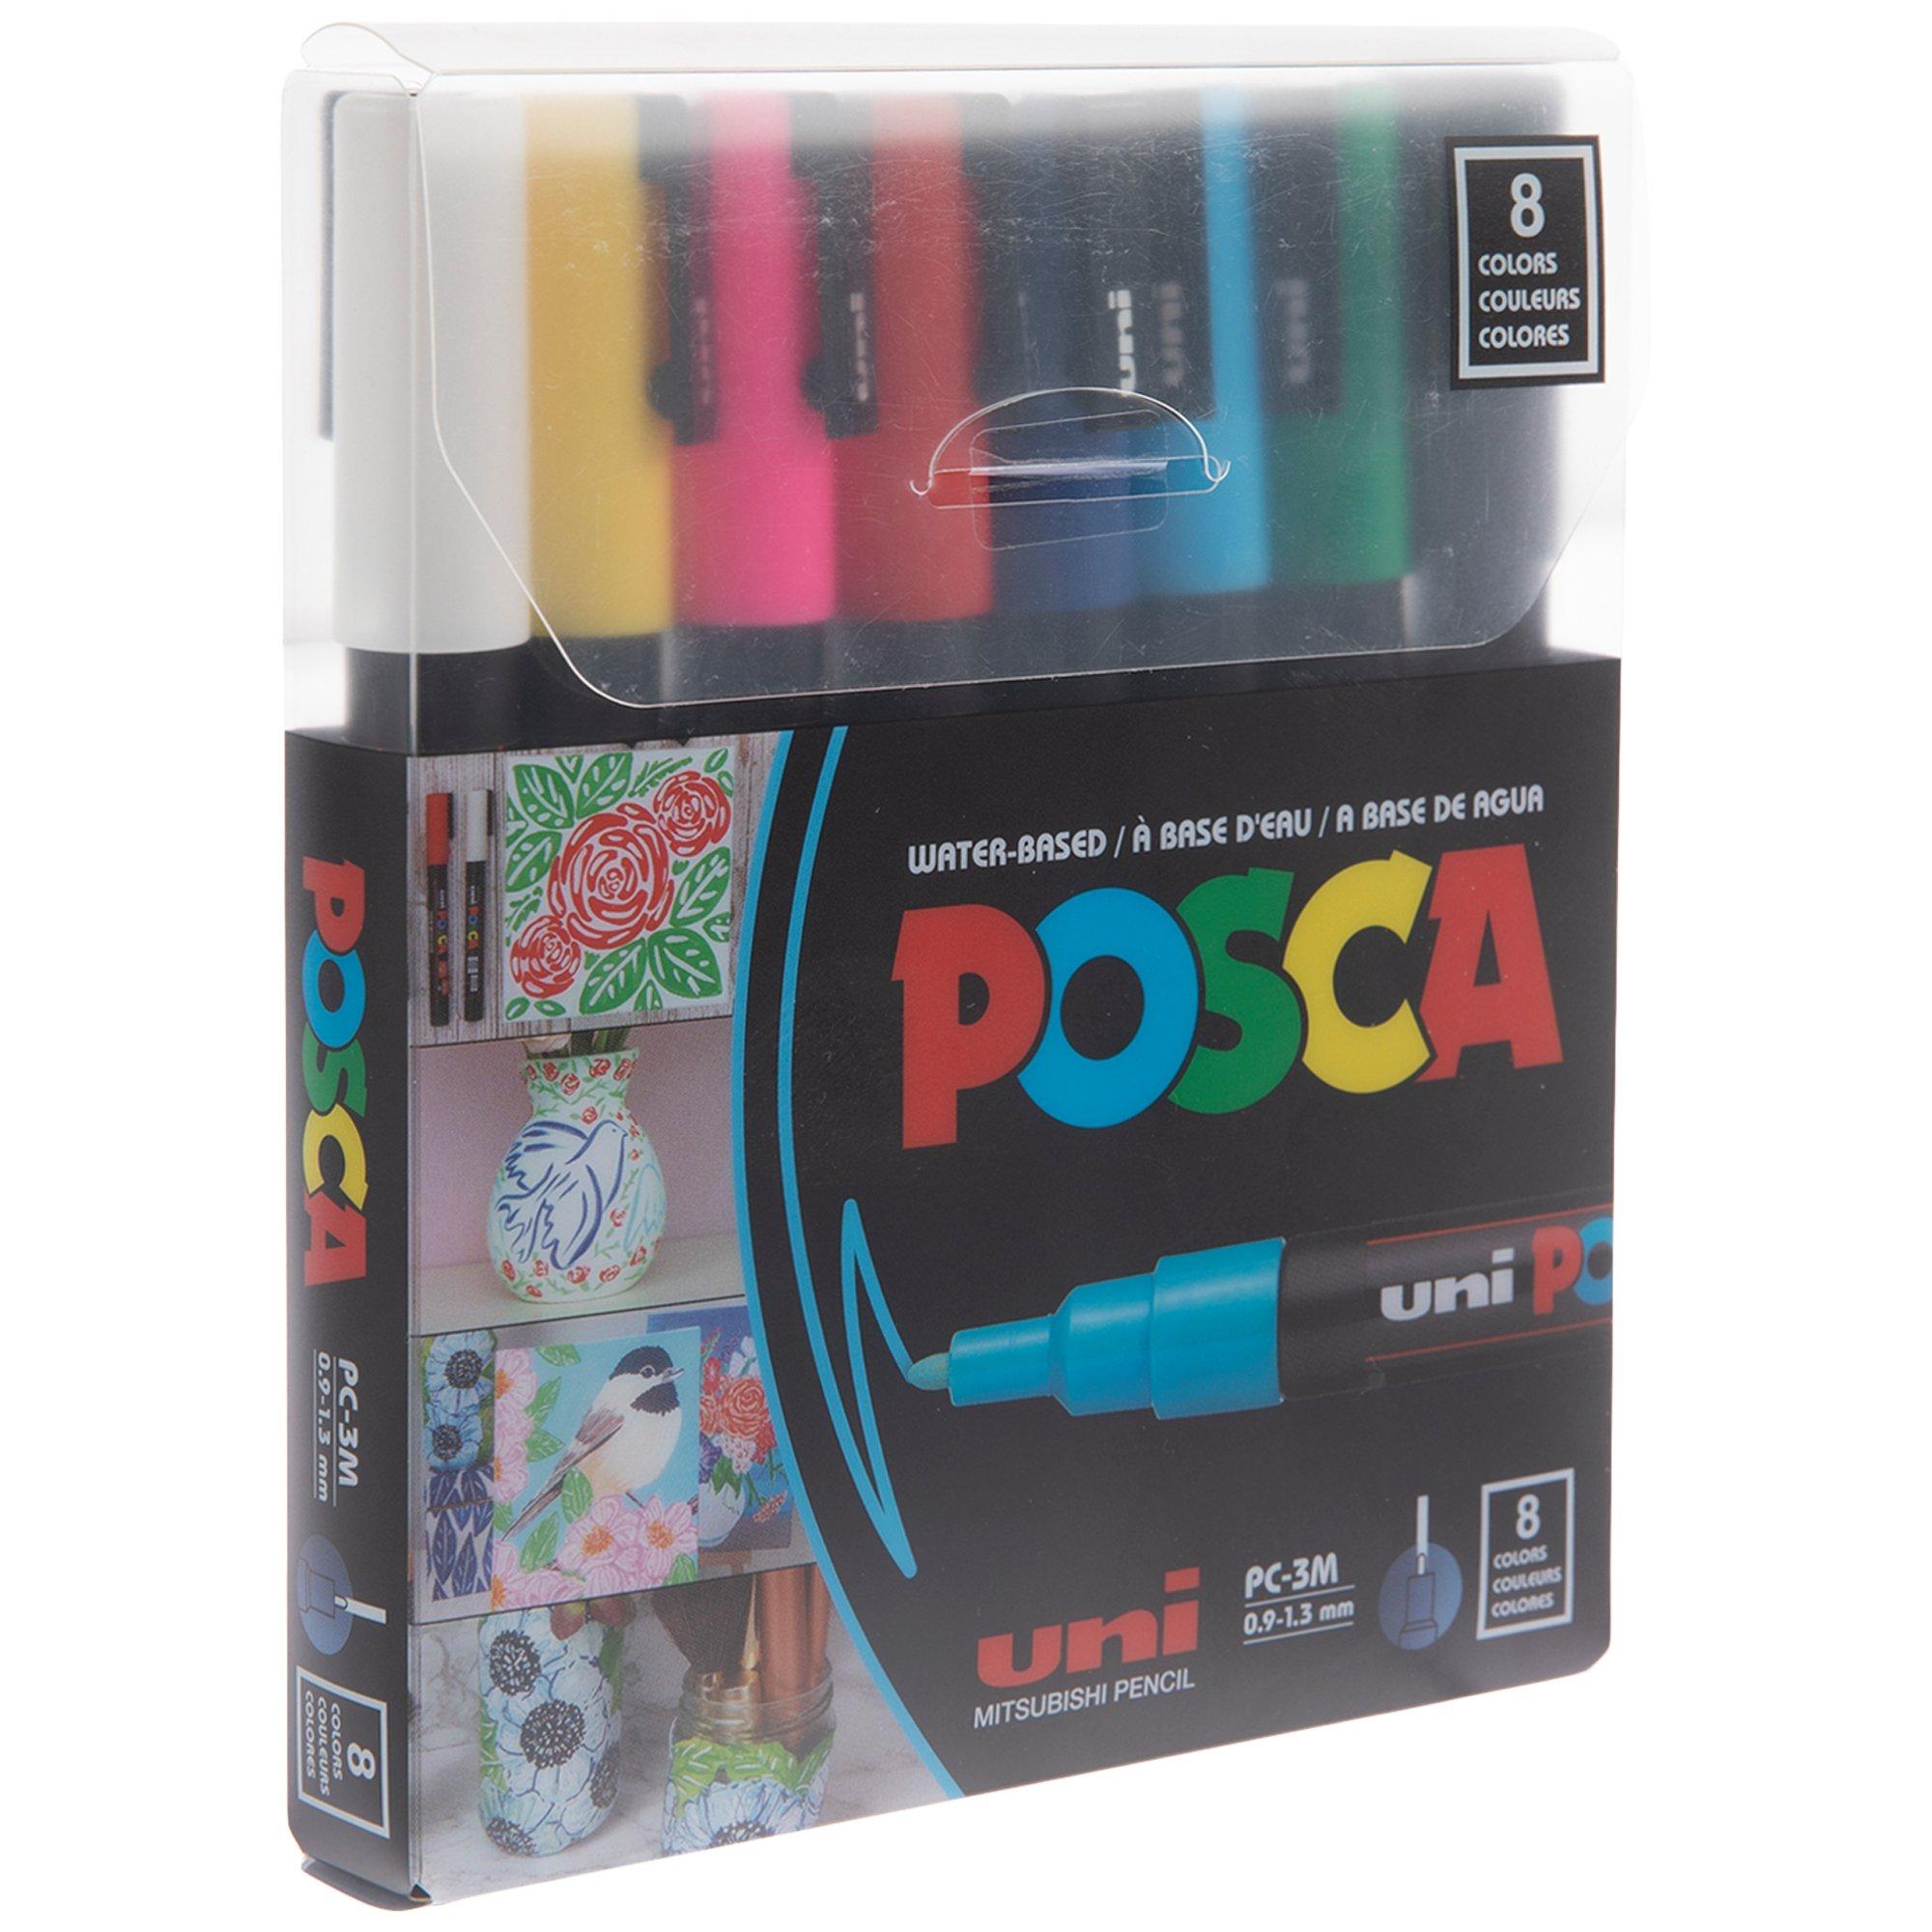 Uni POSCA - PC-3M Art Paint Markers - Cool Tones - Set of 8 - In Gift Box